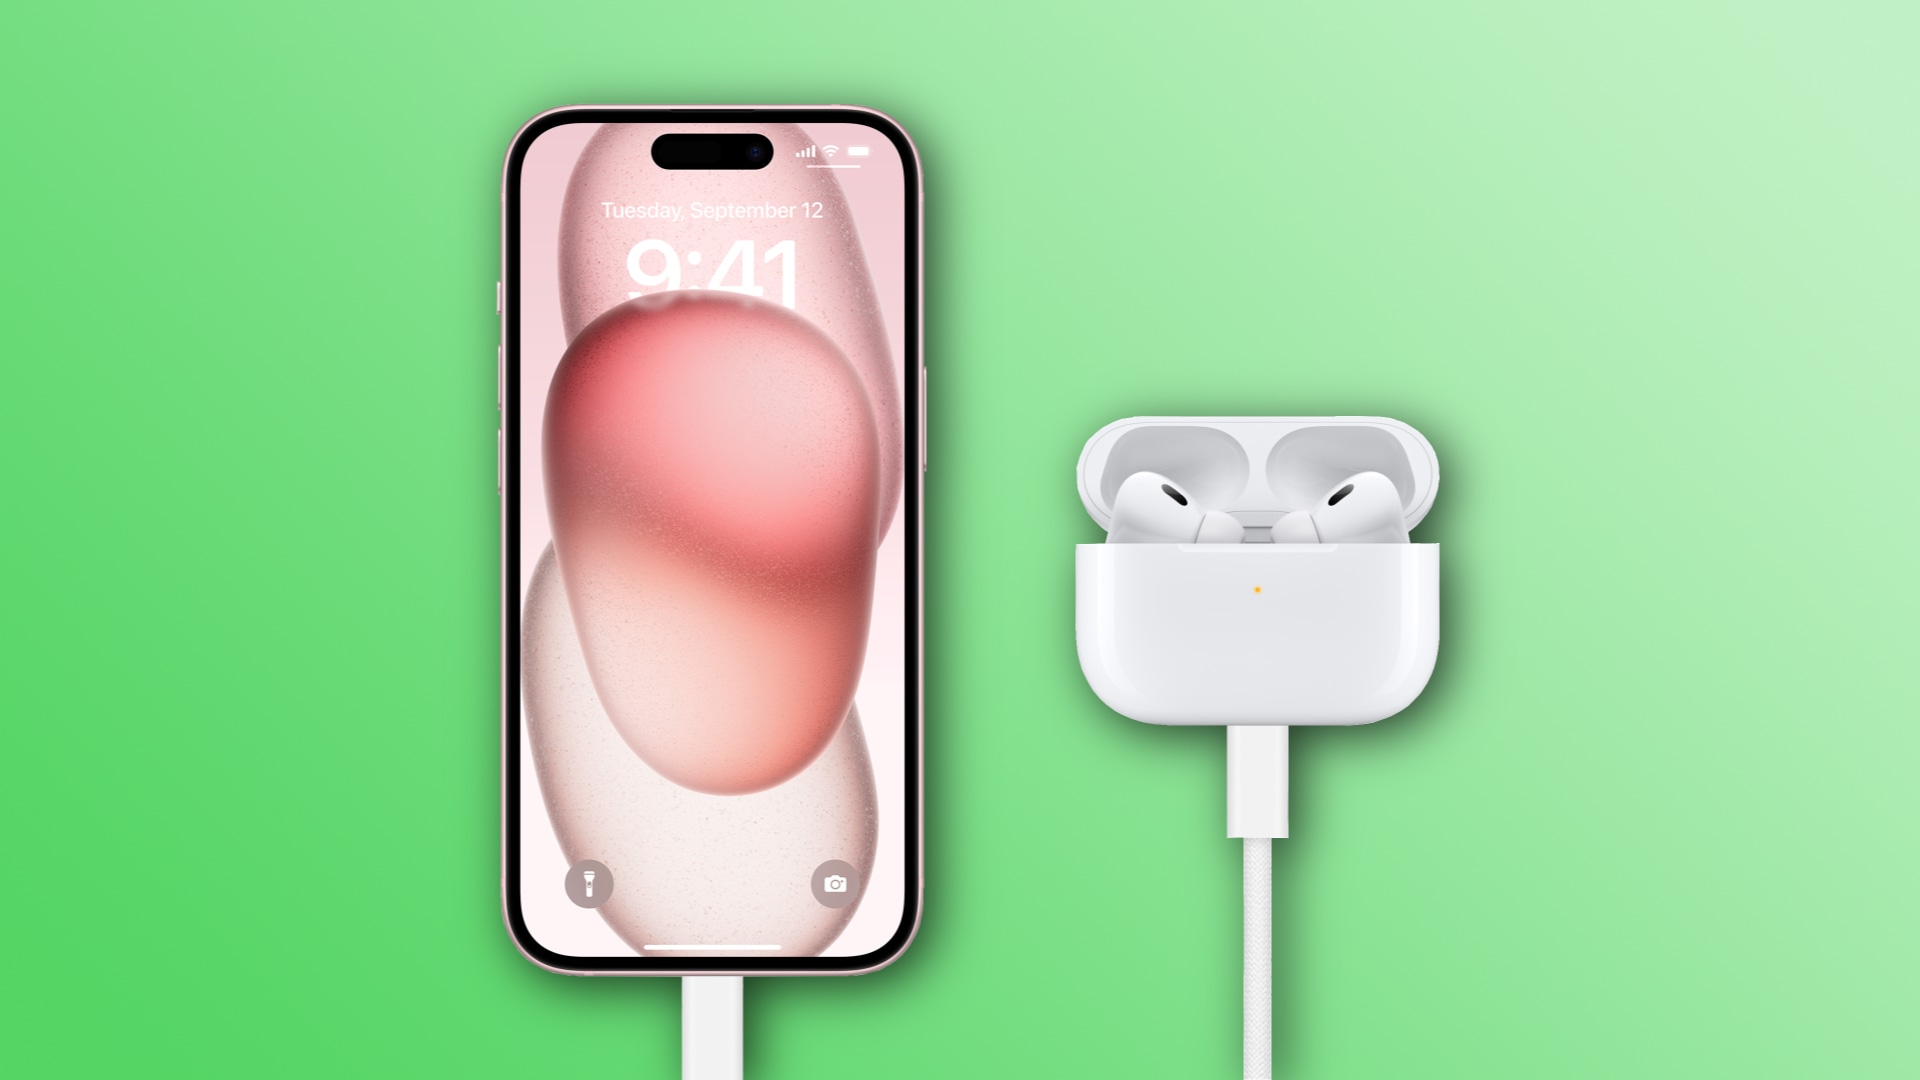 You can now charge your AirPods Pro or Apple Watch from the iPhone’s USB‑C port